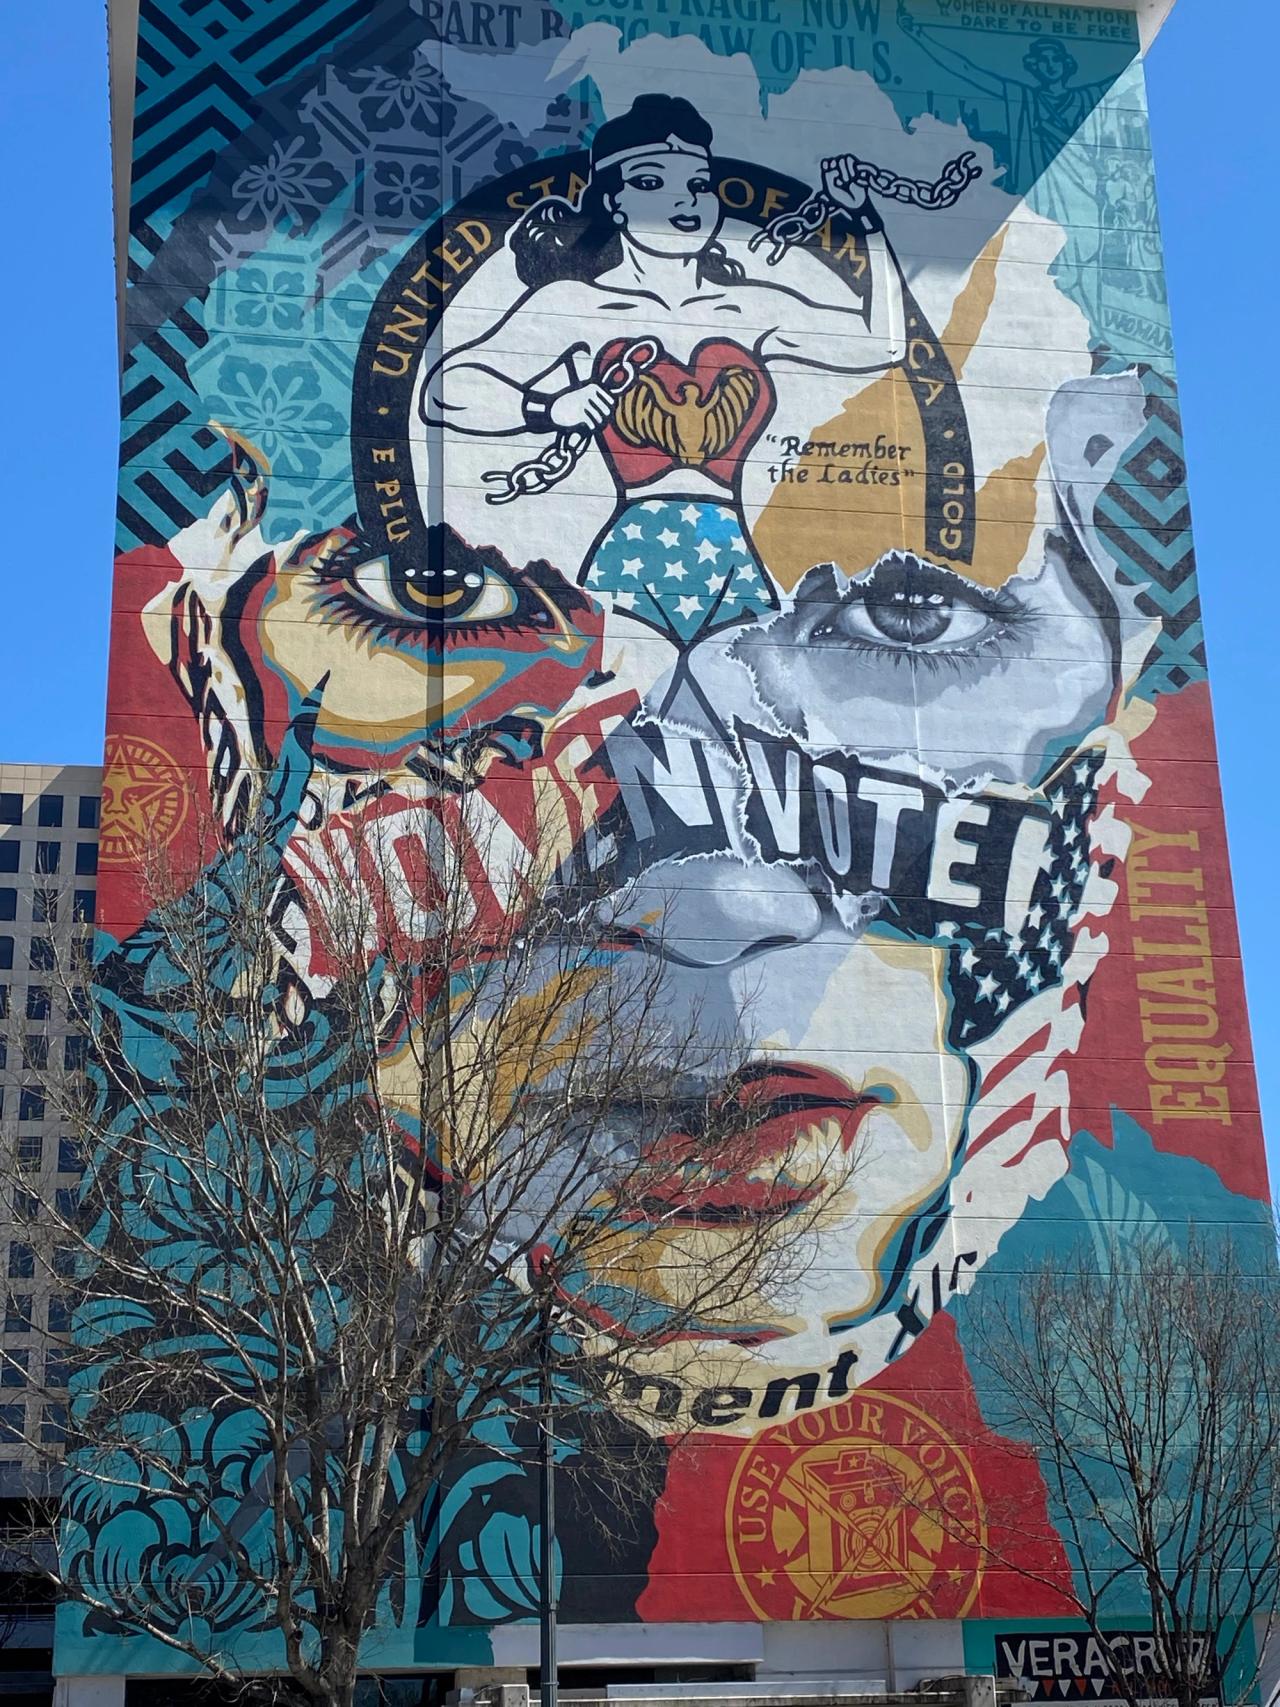 Picture of a mural from Austin, Texas. A large painting of a woman's face with a text on top saying "Women Vote".